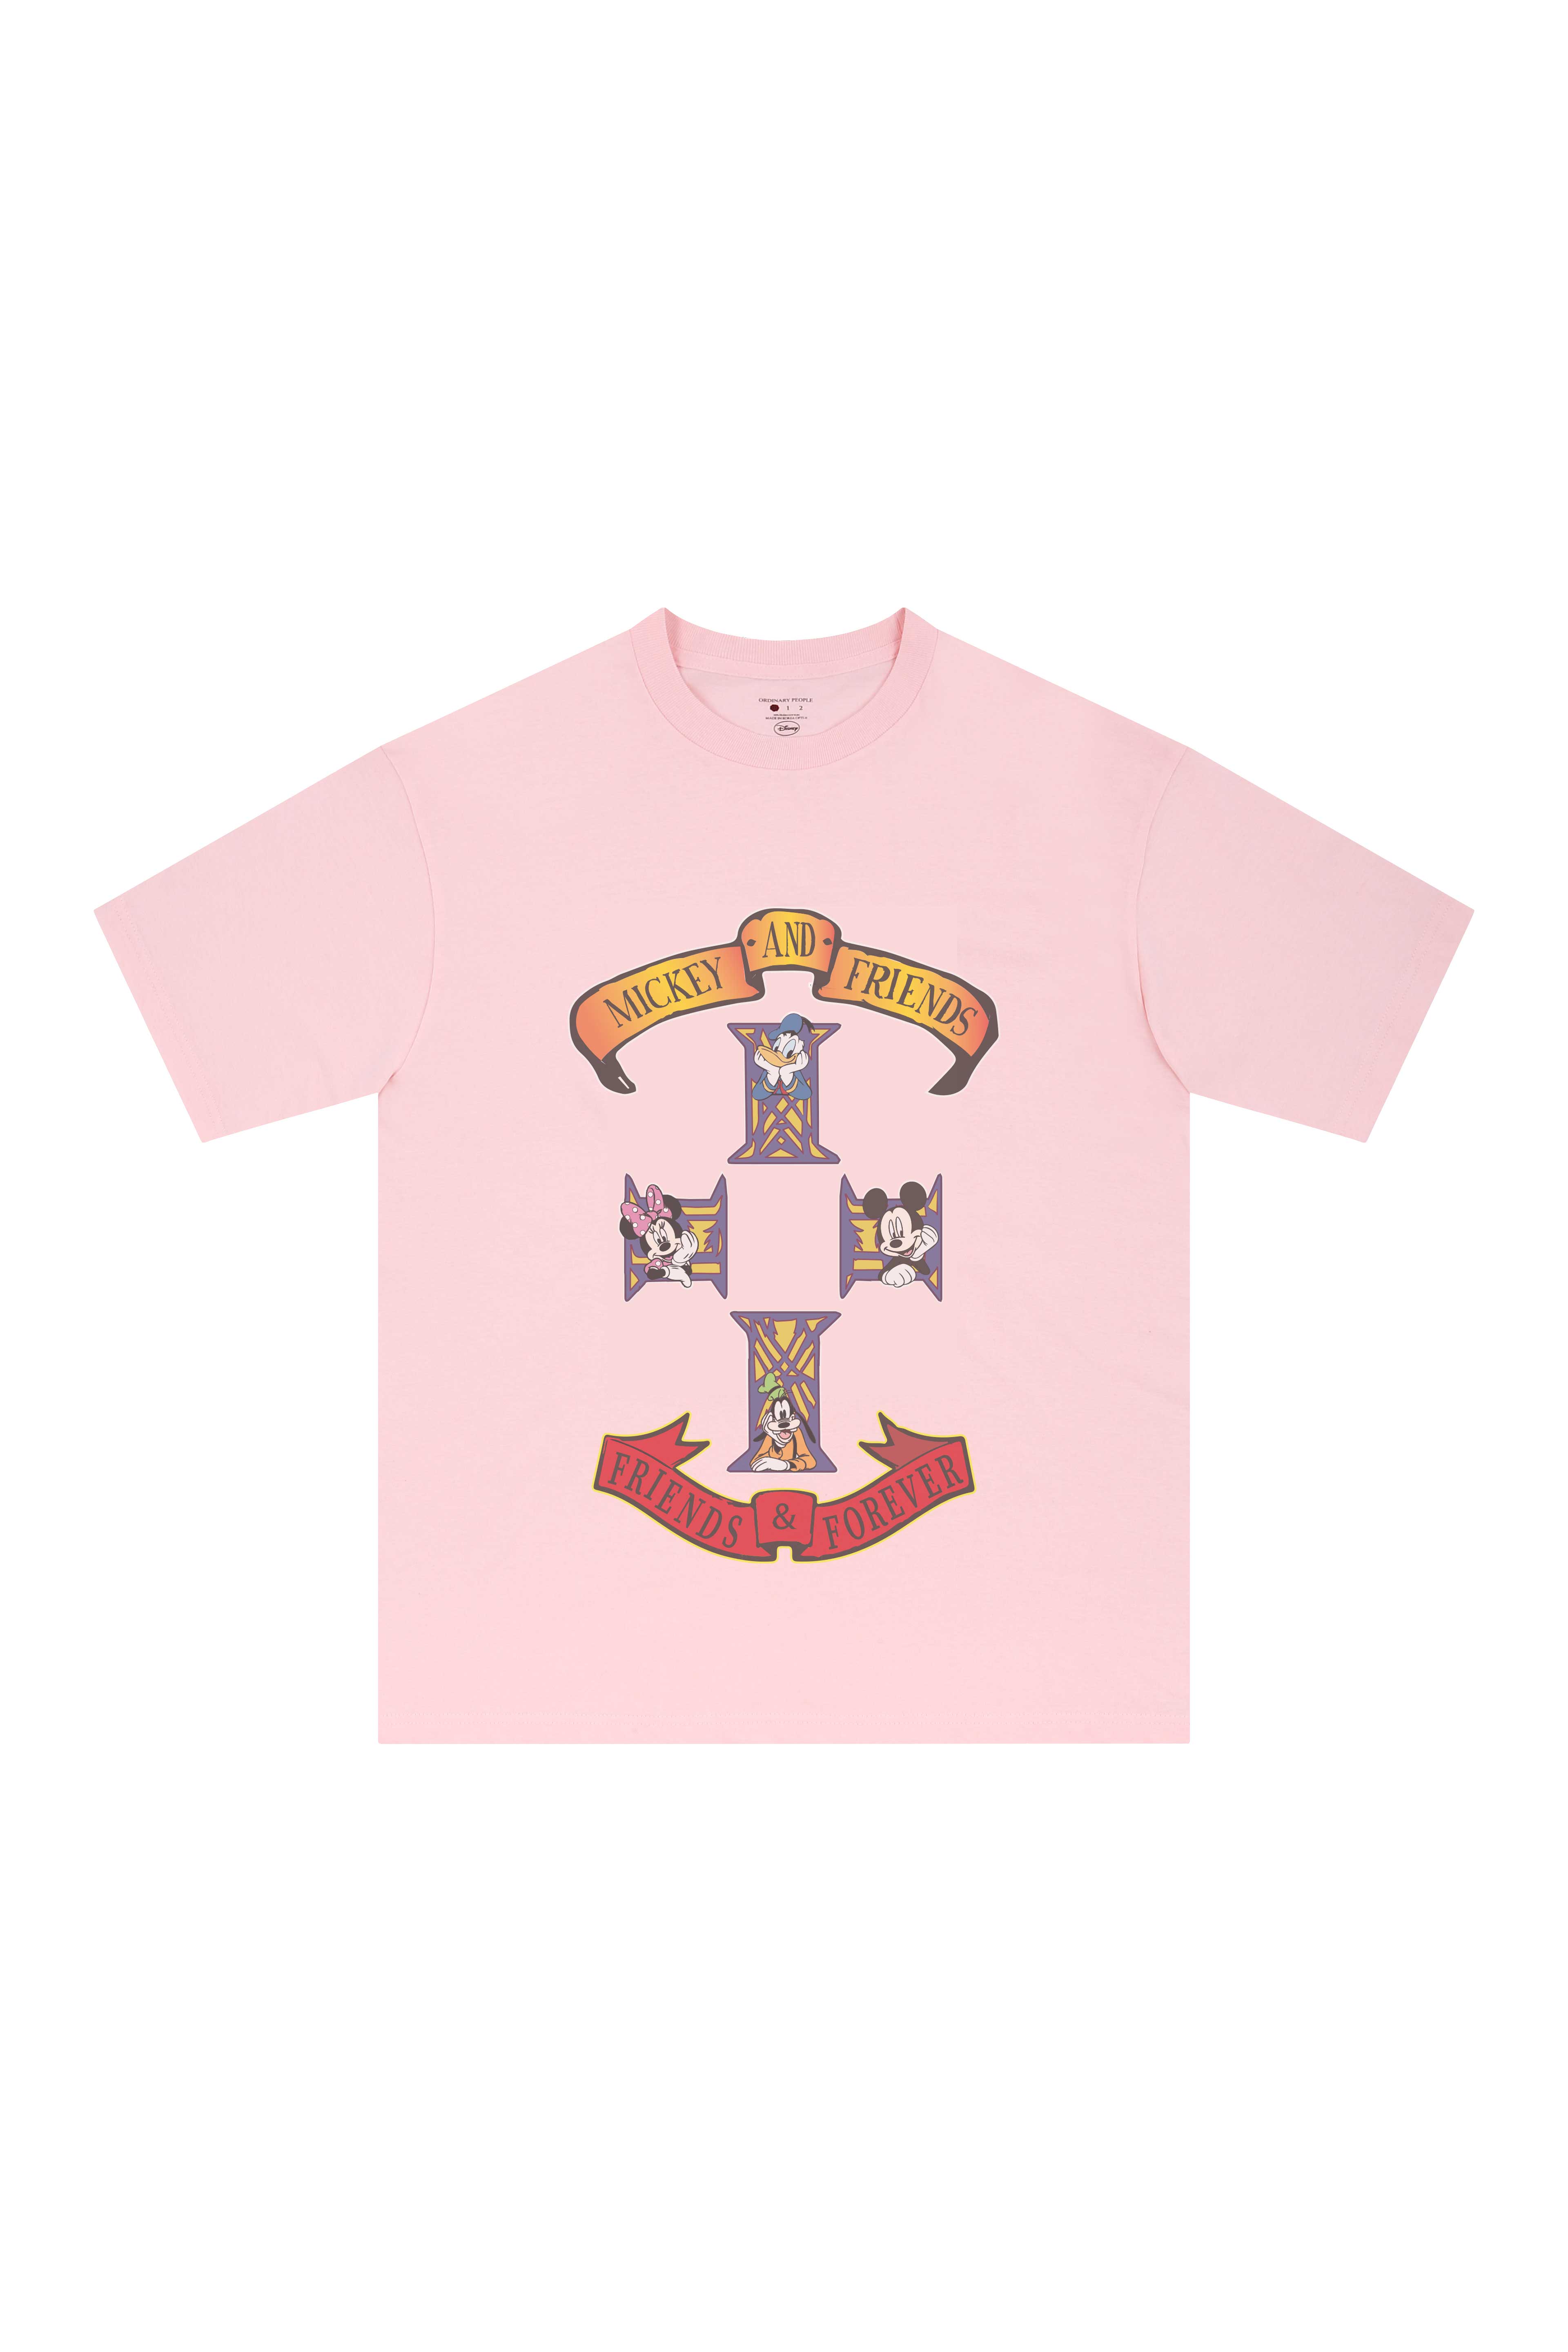 [ORDINARYPEOPLE X DISNEY] MICKEY AND FRIENDS PINK T-SHIRTS